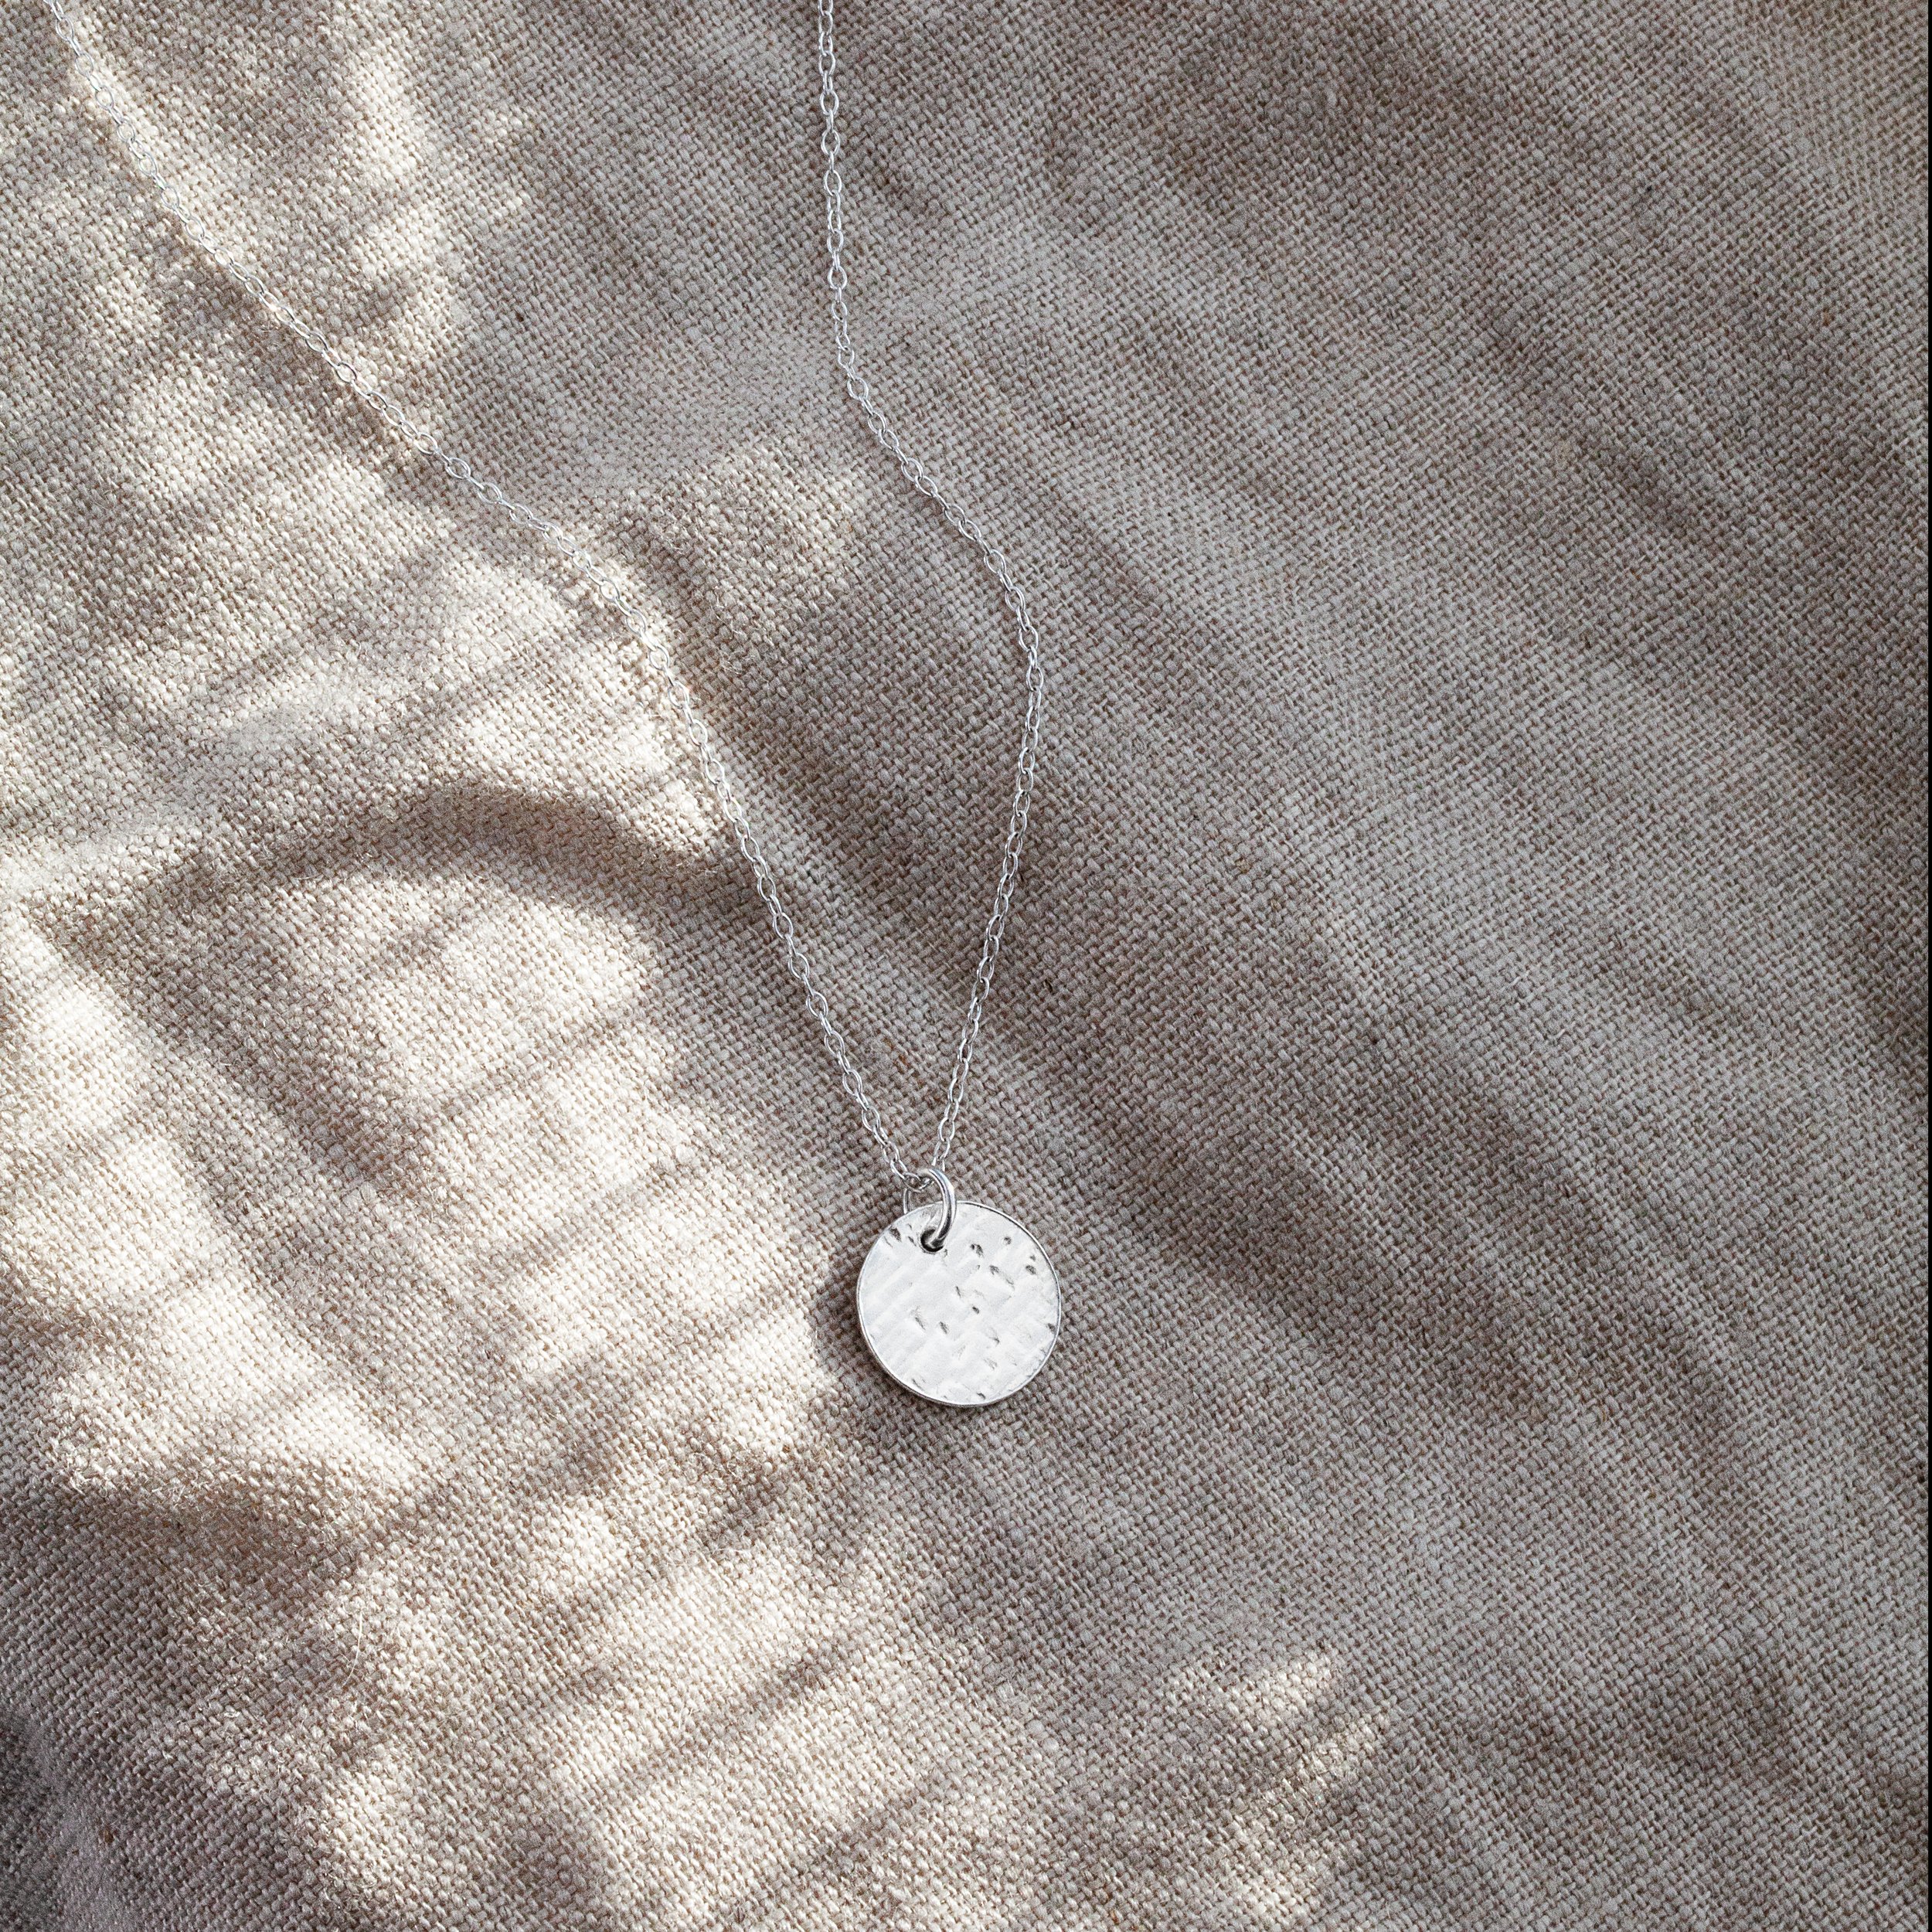 Hammered Effect Sterling Silver Disc Pendant & Chain Length 38cm 9.3g